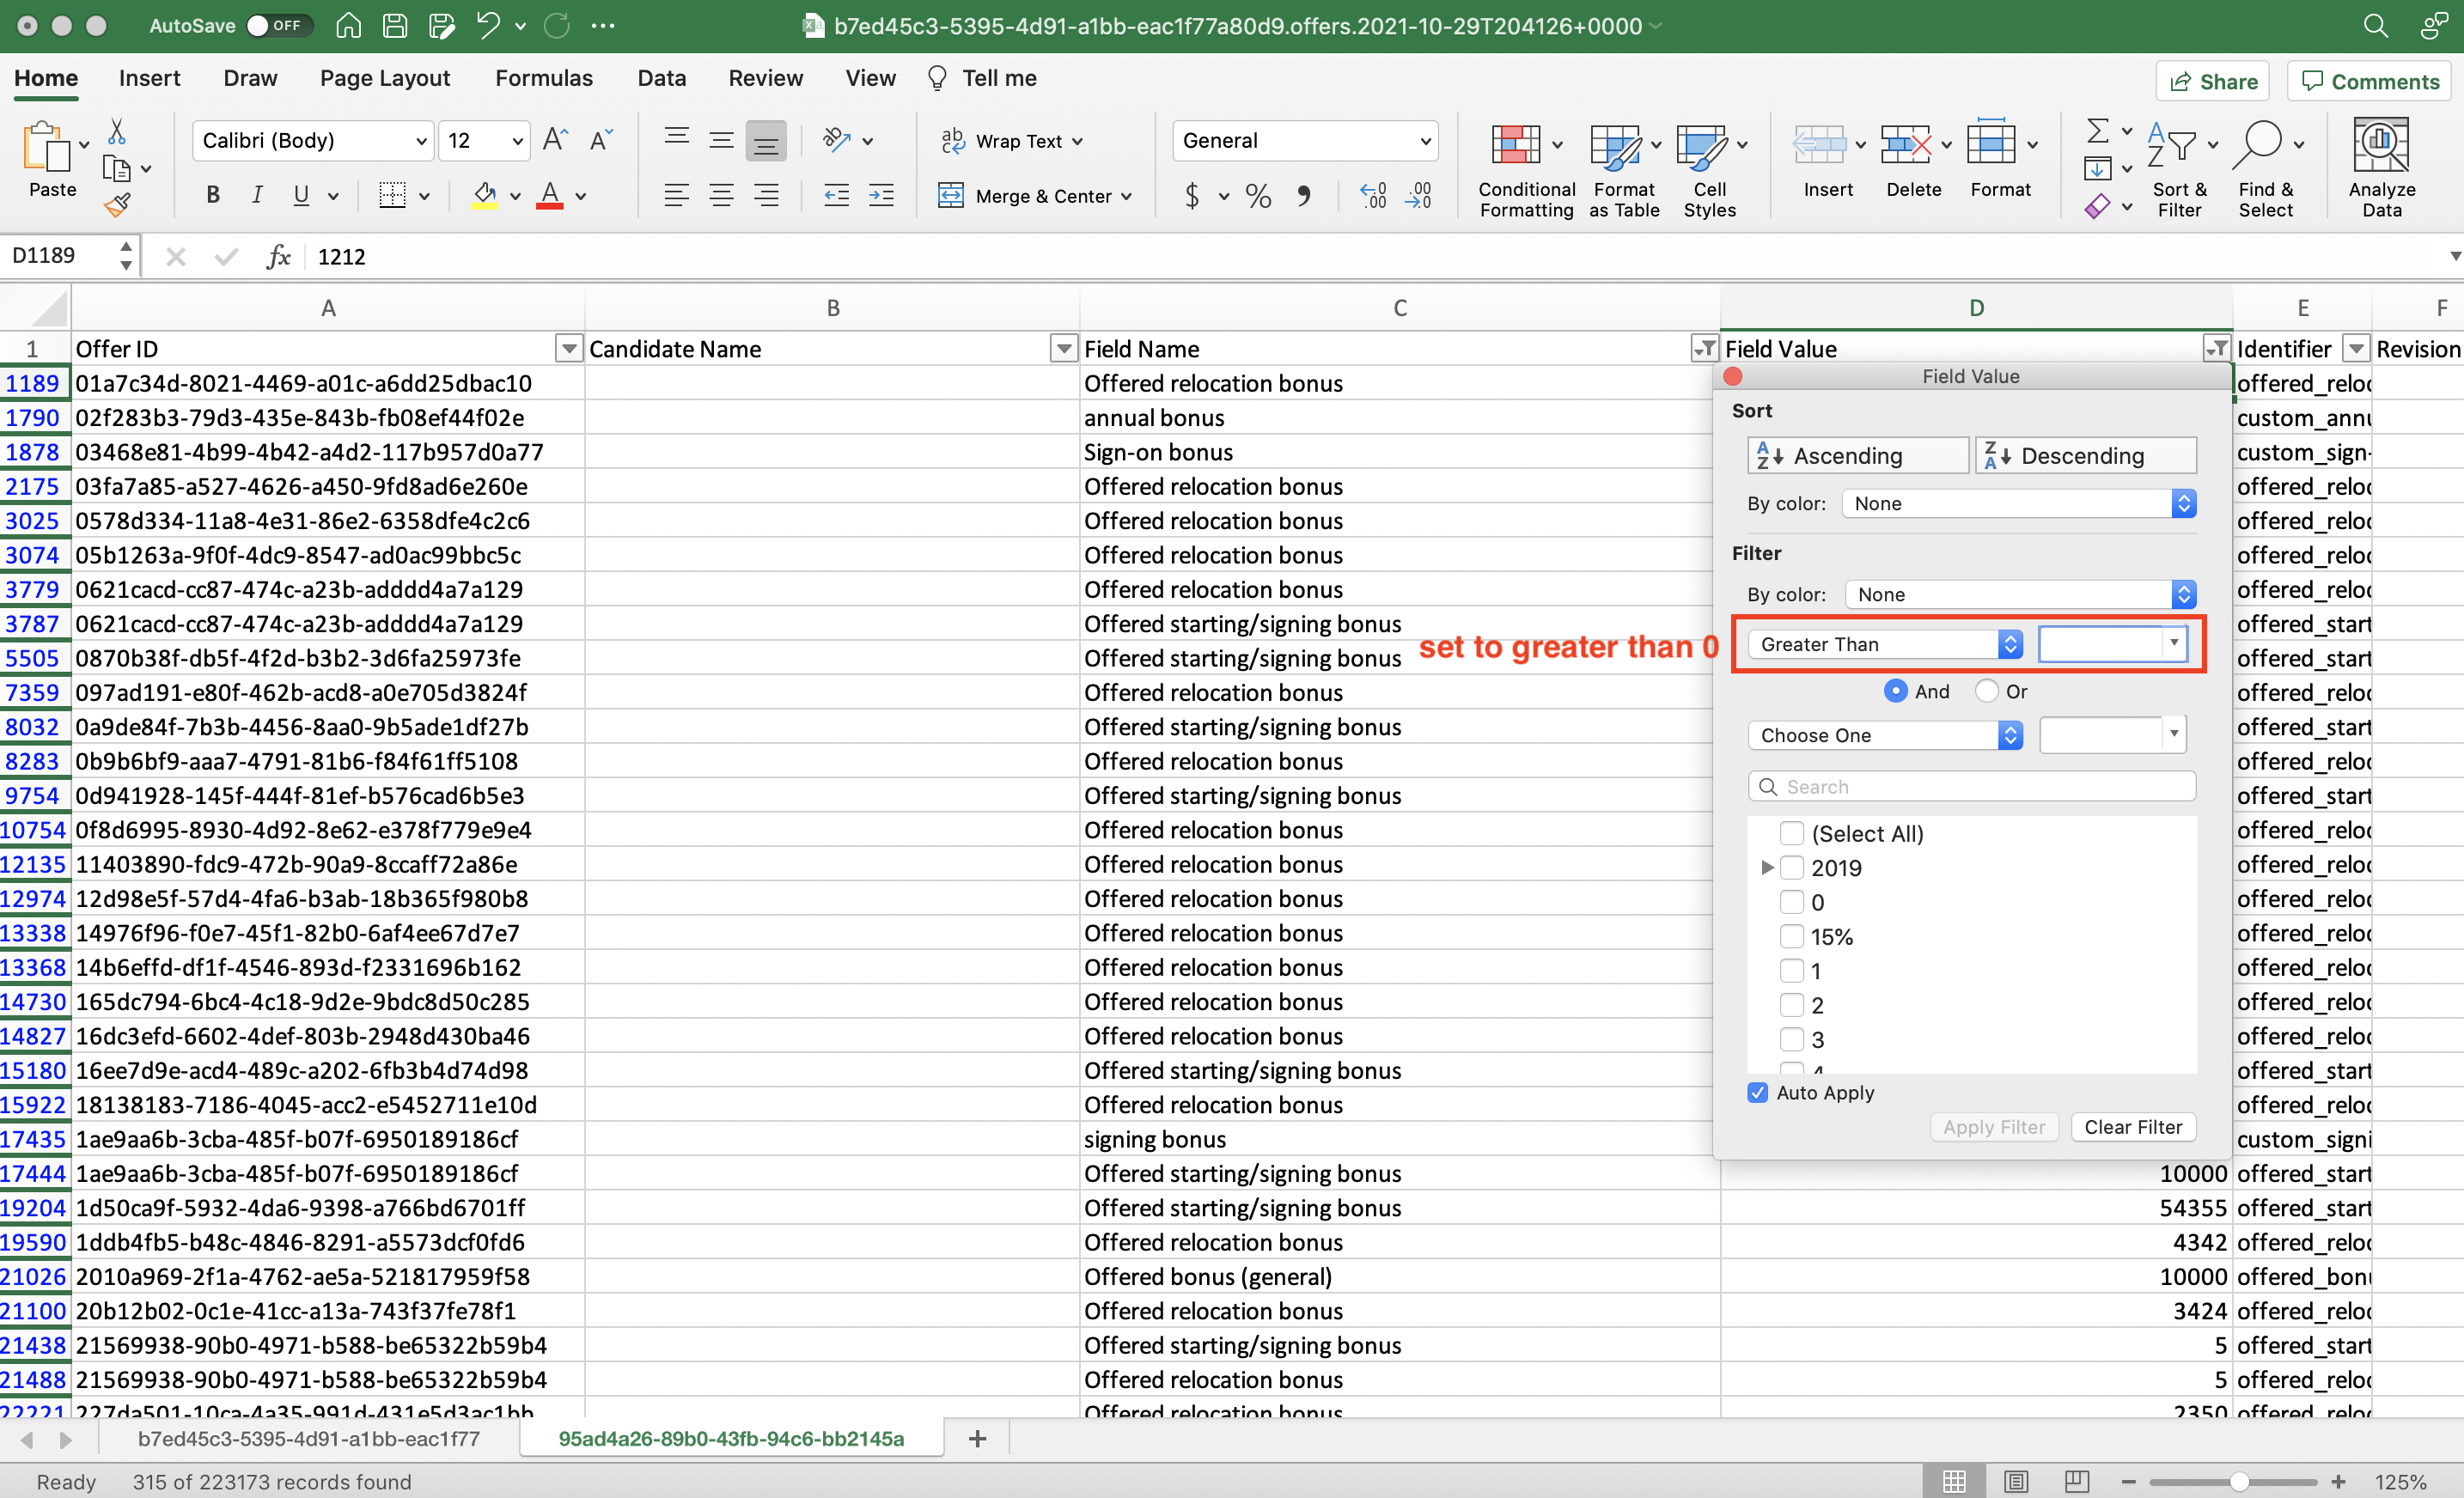 Filter menu expanded from cell D1 in Offers custom fields spreadsheet; fields to filter for values greater than zero are circled.